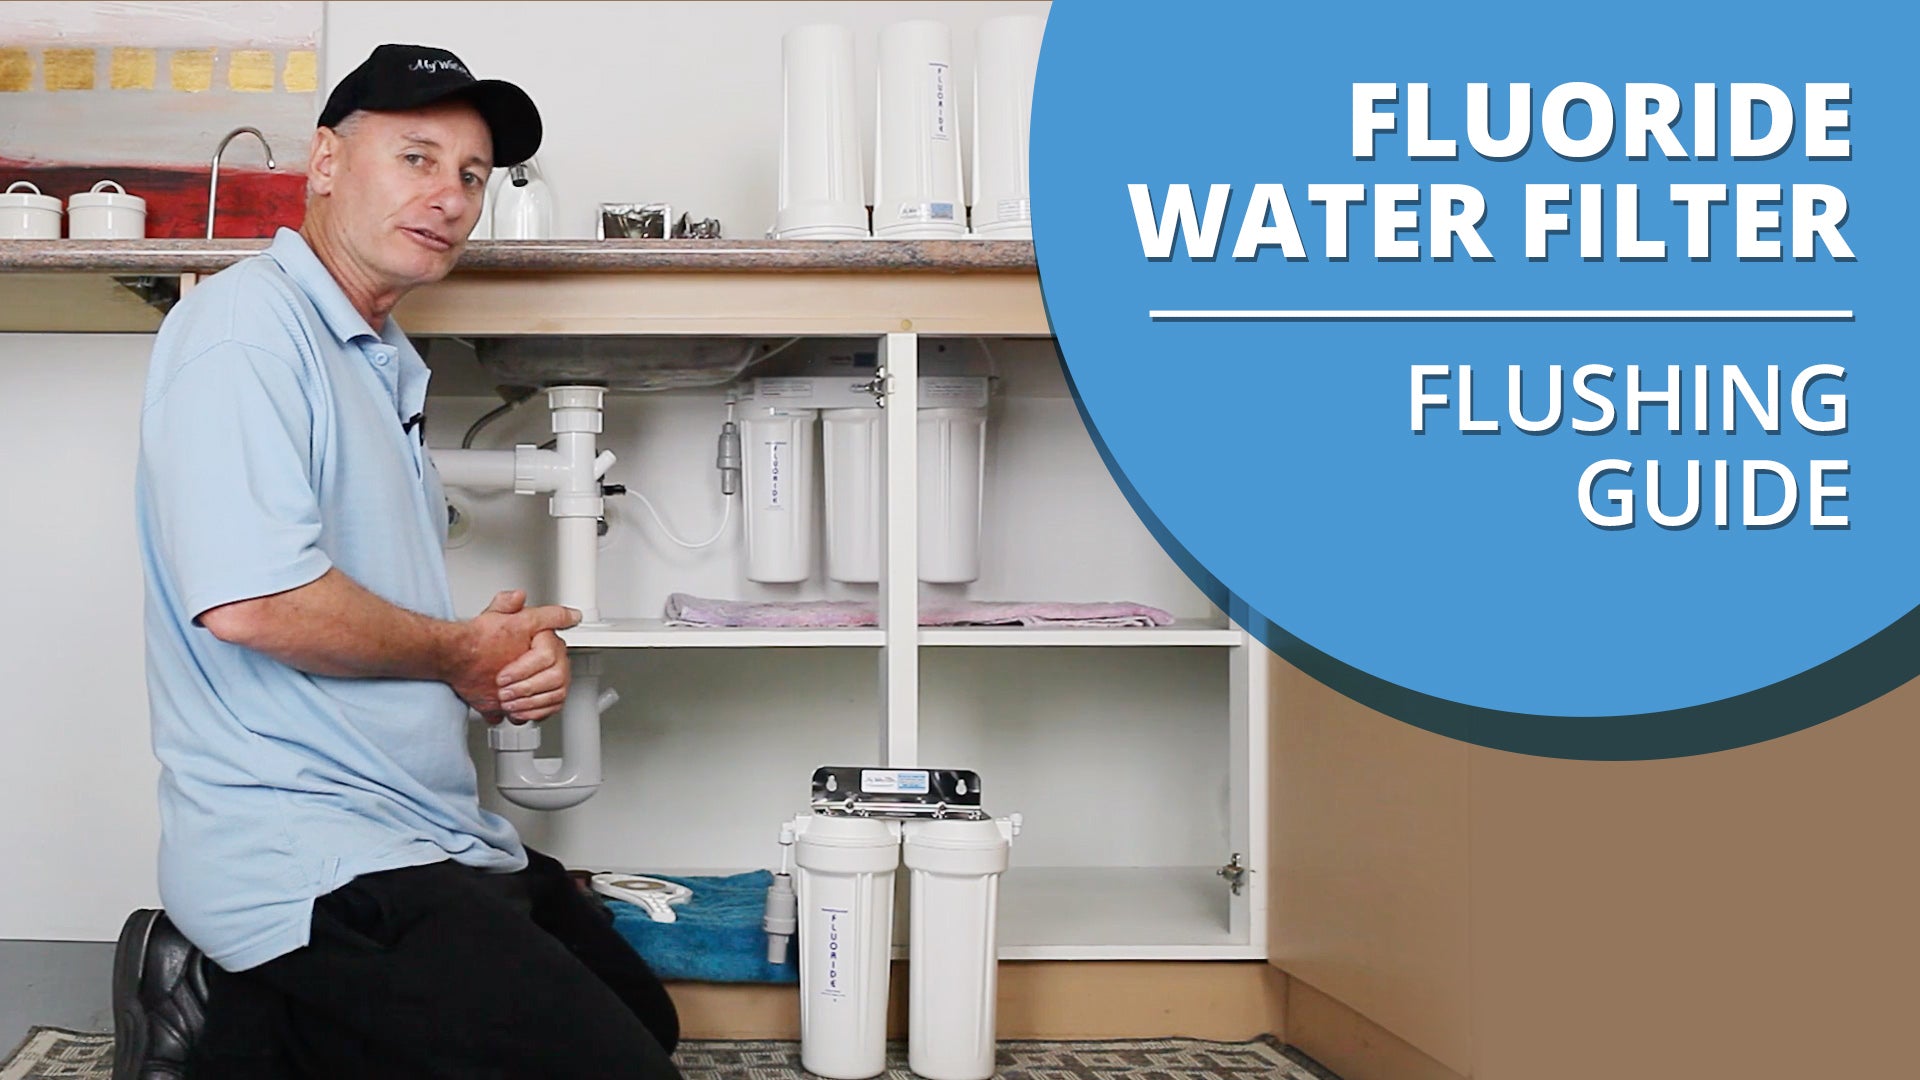 How to Flush your Fluoride Water Filter [VIDEO]